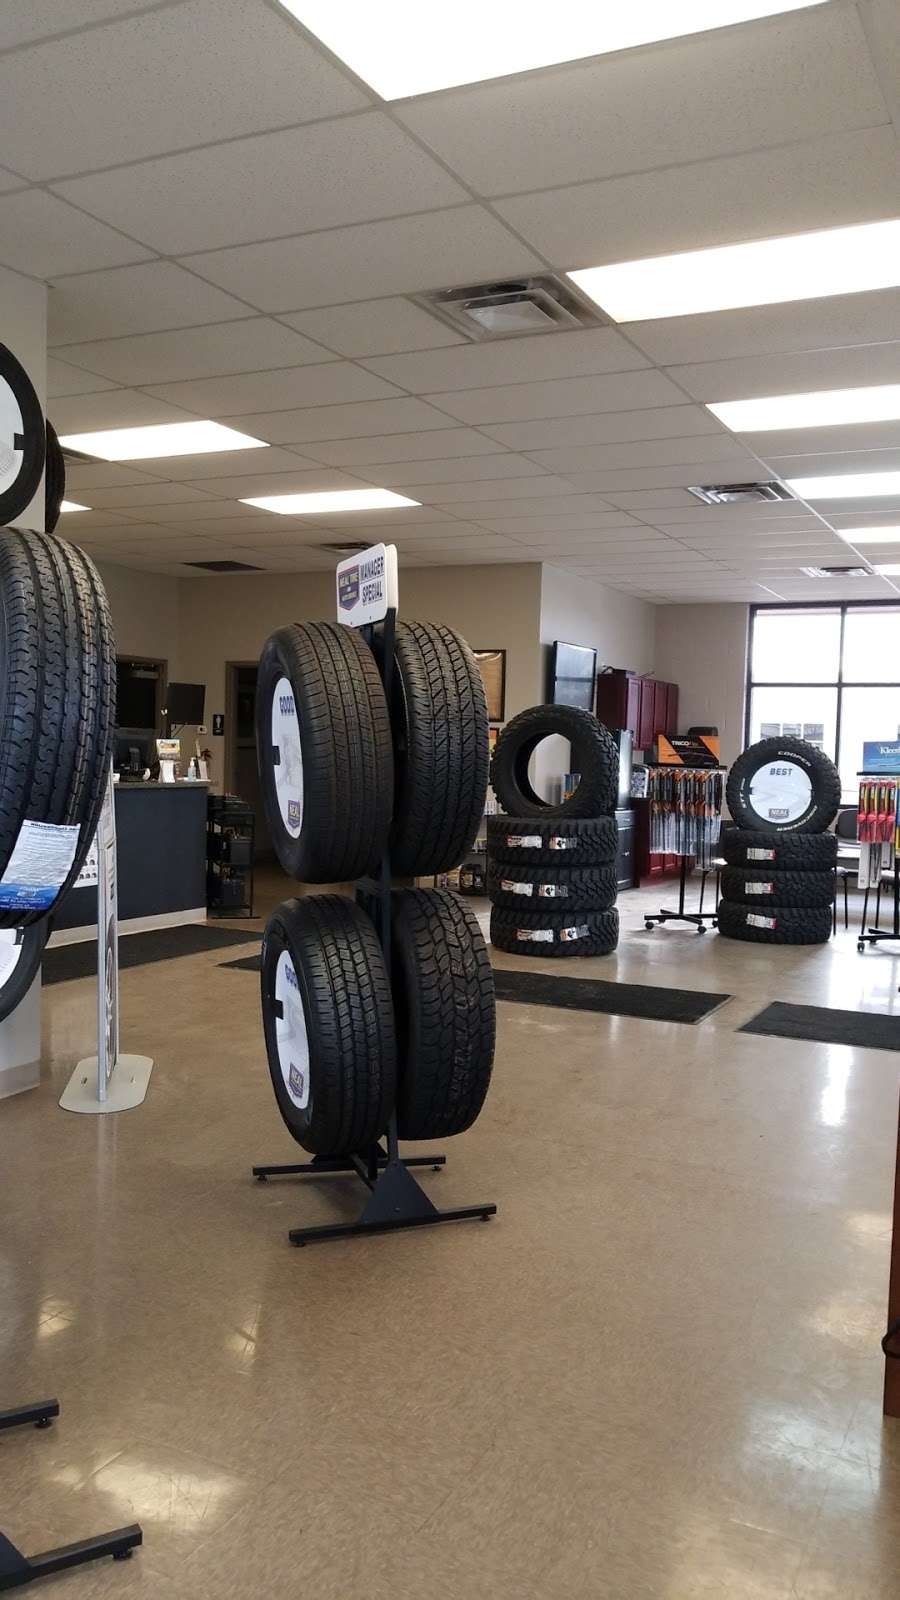 Neal Tire and Auto Service at Geist | 13894 E 96th St, McCordsville, IN 46055, USA | Phone: (317) 335-5558